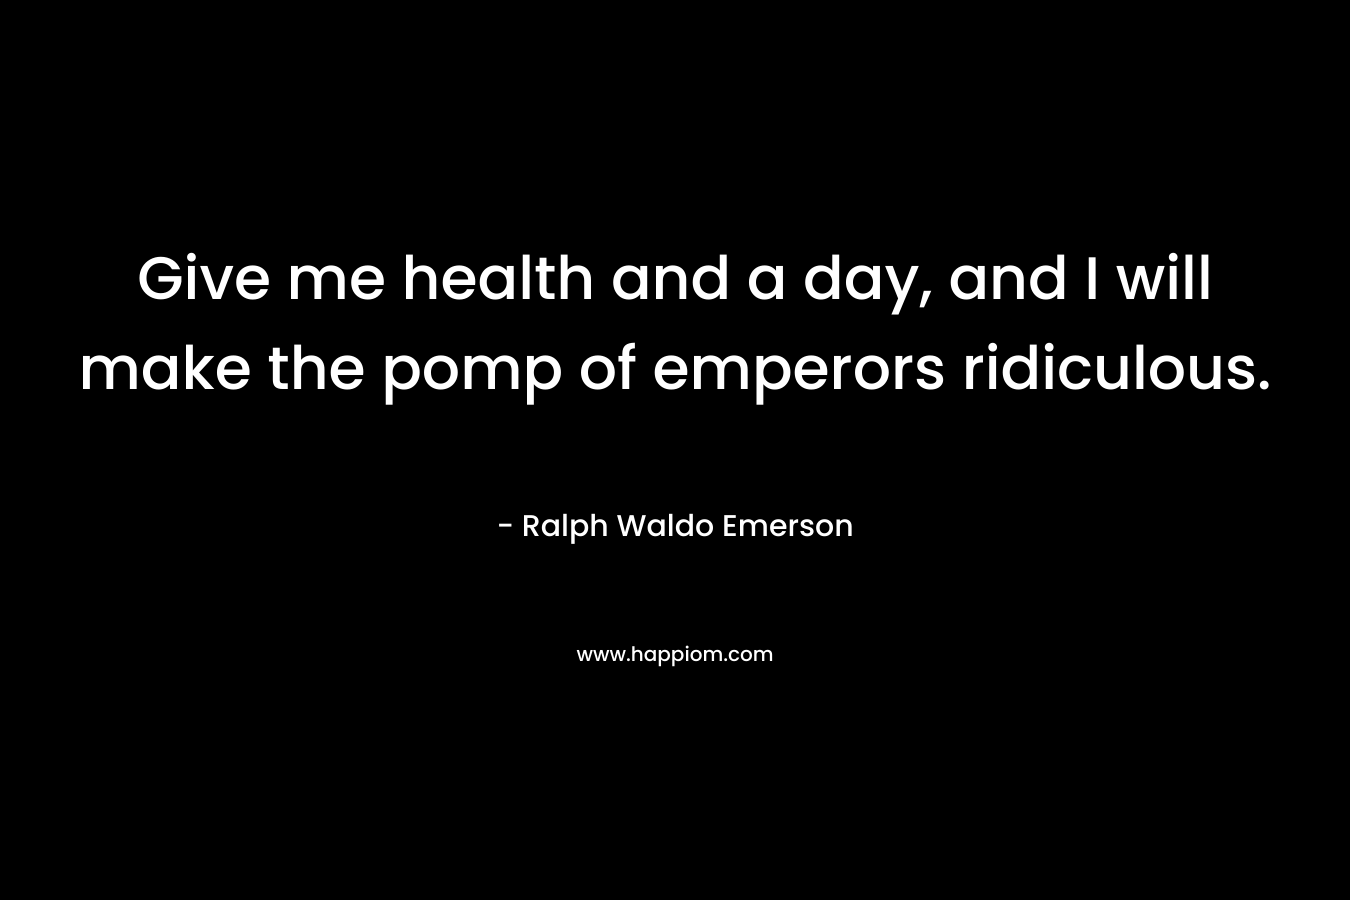 Give me health and a day, and I will make the pomp of emperors ridiculous. – Ralph Waldo Emerson